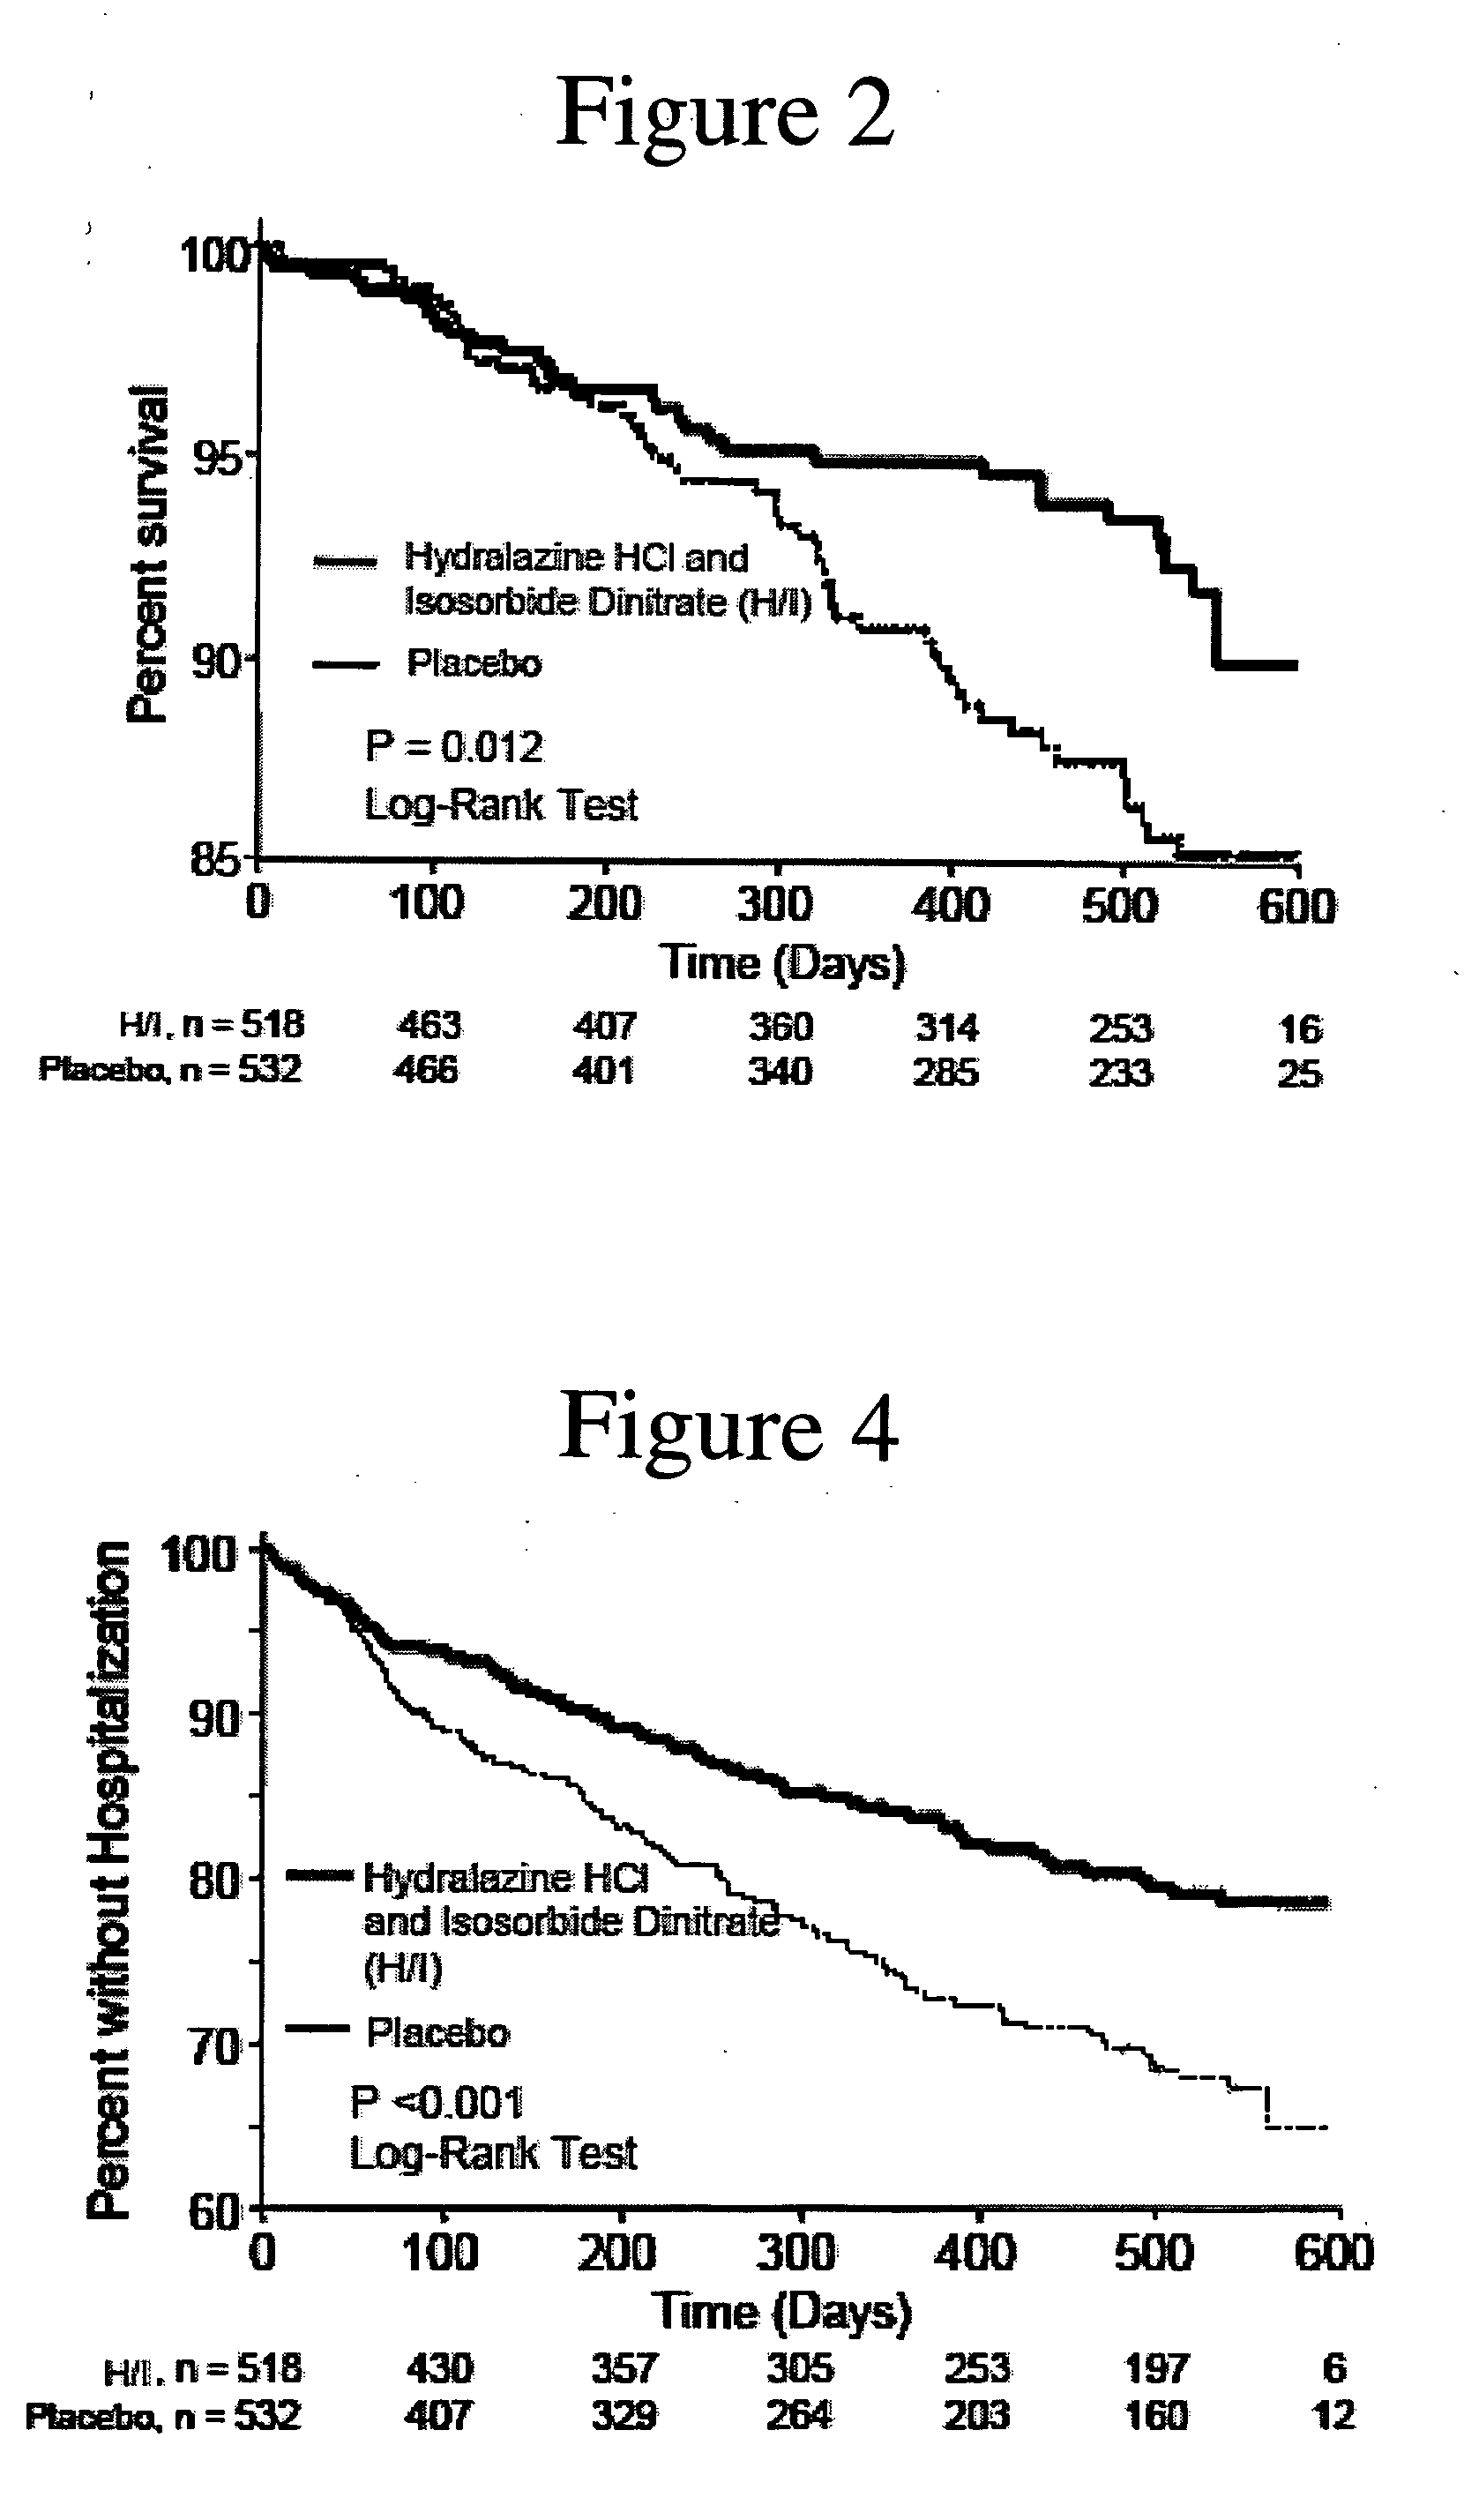 Methods for reducing hospitalizations related to heart failure